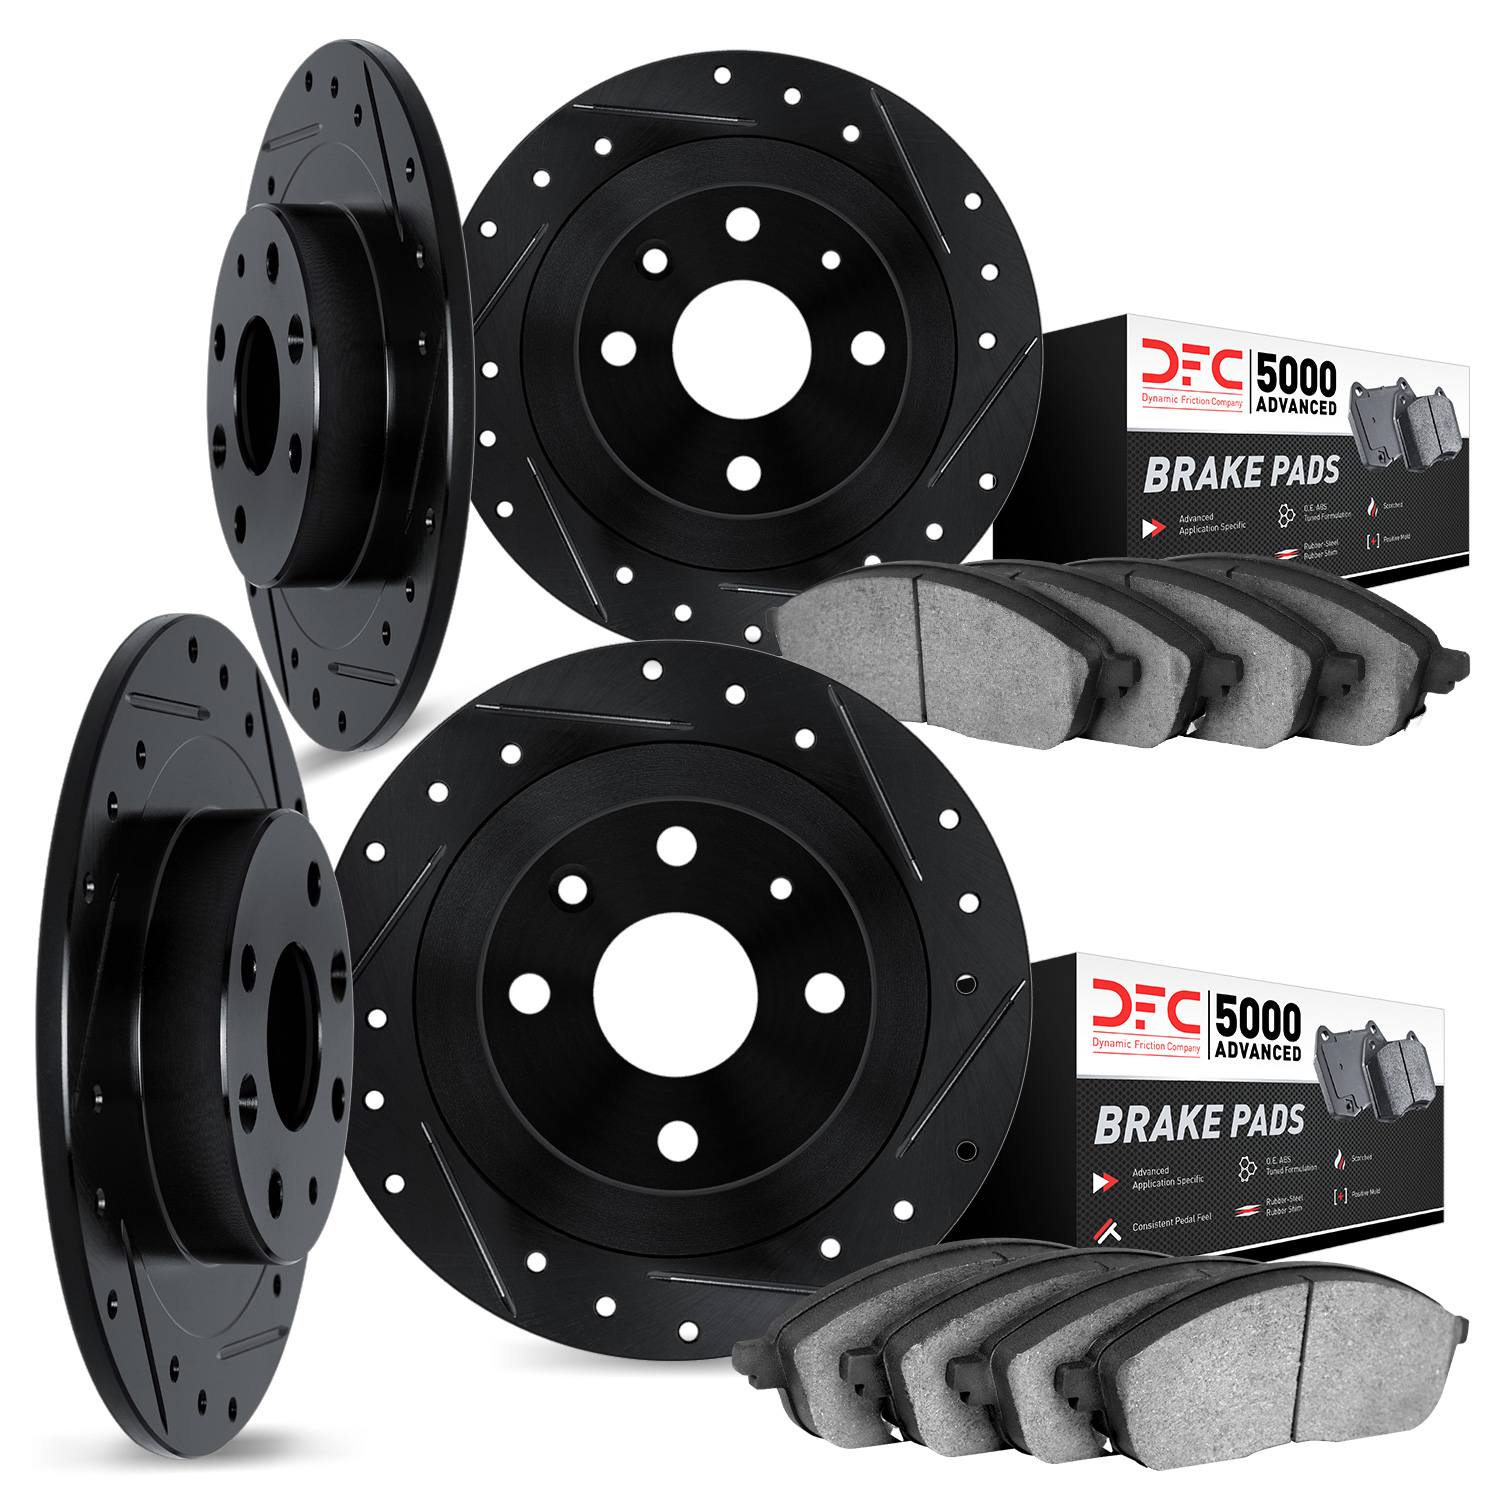 8504-76108 Drilled/Slotted Brake Rotors w/5000 Advanced Brake Pads Kit [Black], 1979-1981 Lexus/Toyota/Scion, Position: Front an